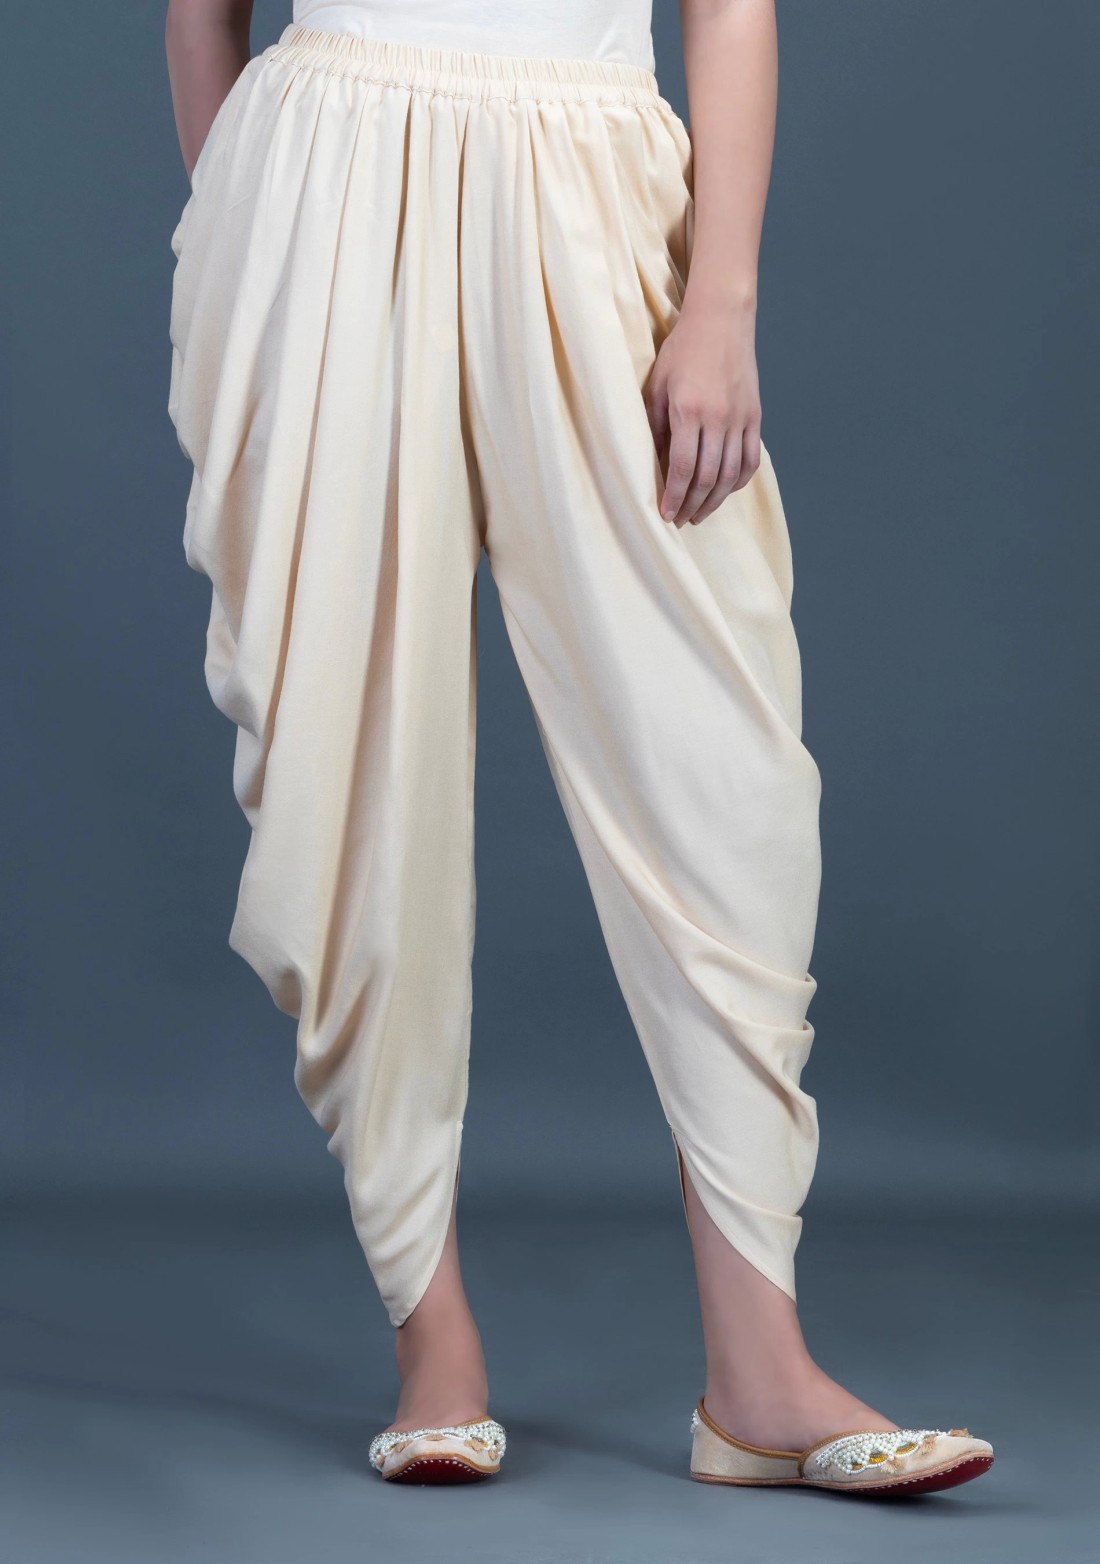 Olive Straight cowl neck Kurta paired with dhoti pants